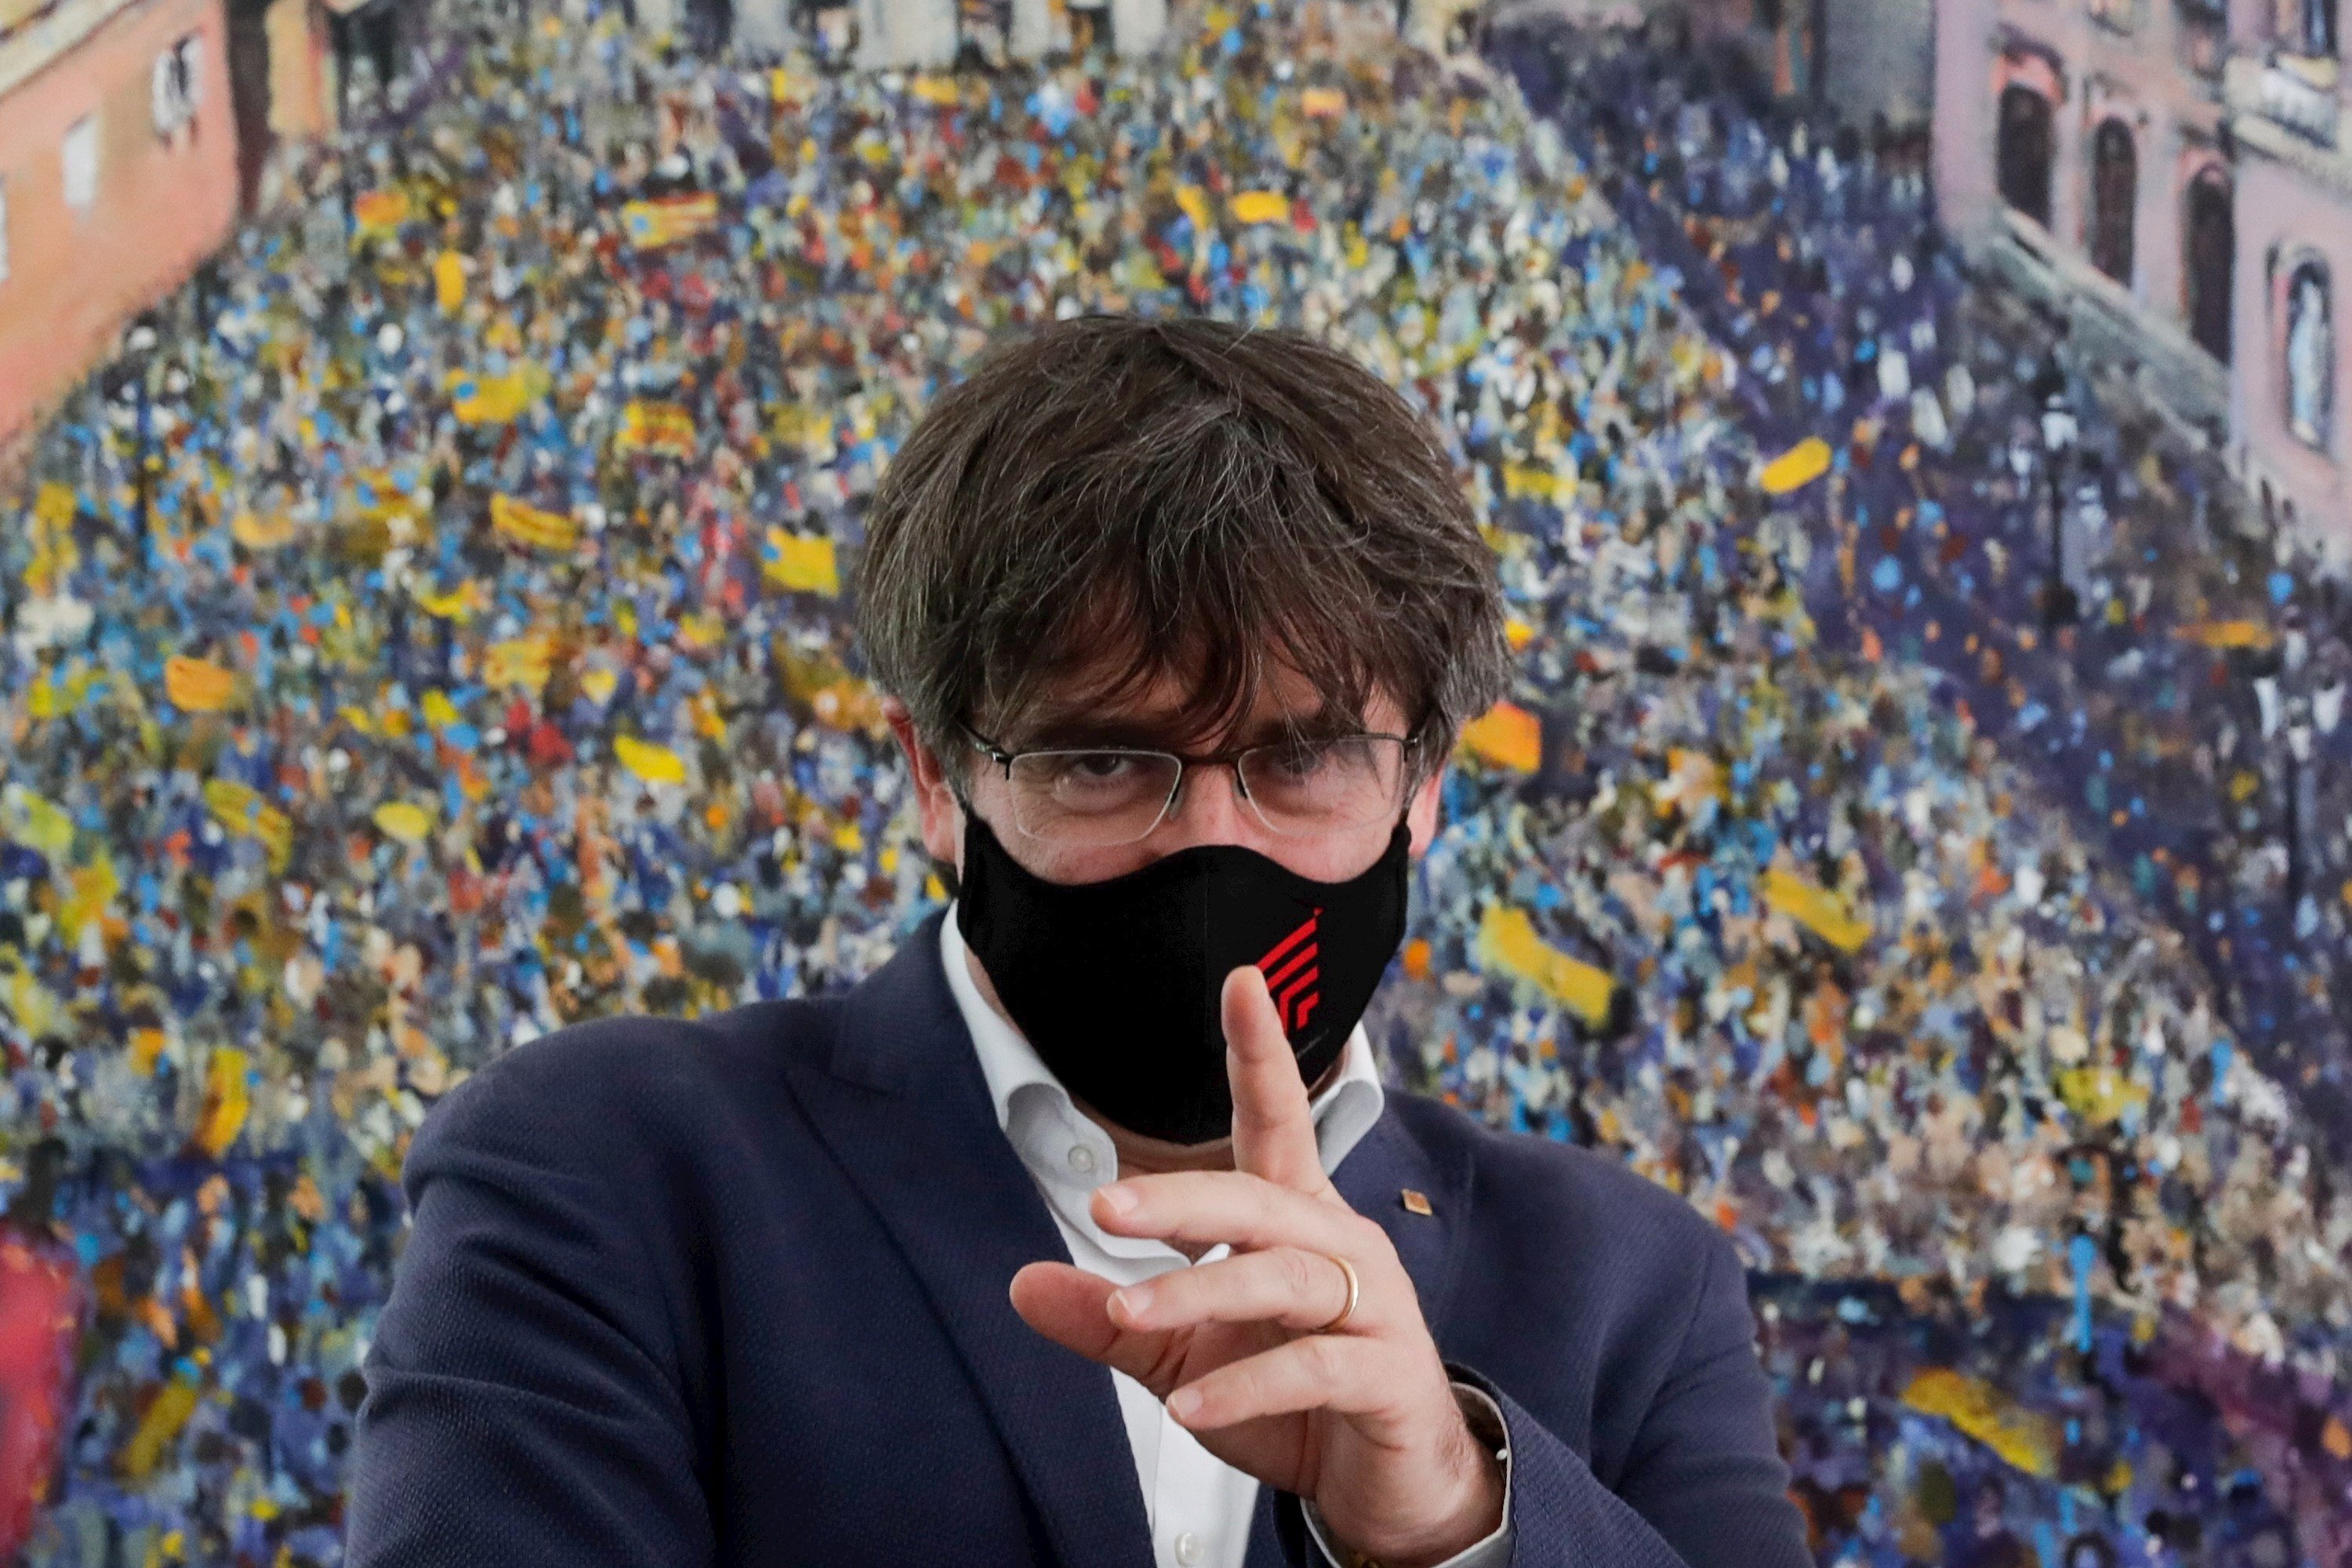 Carles Puigdemont to address France's National Assembly on repression in Catalonia